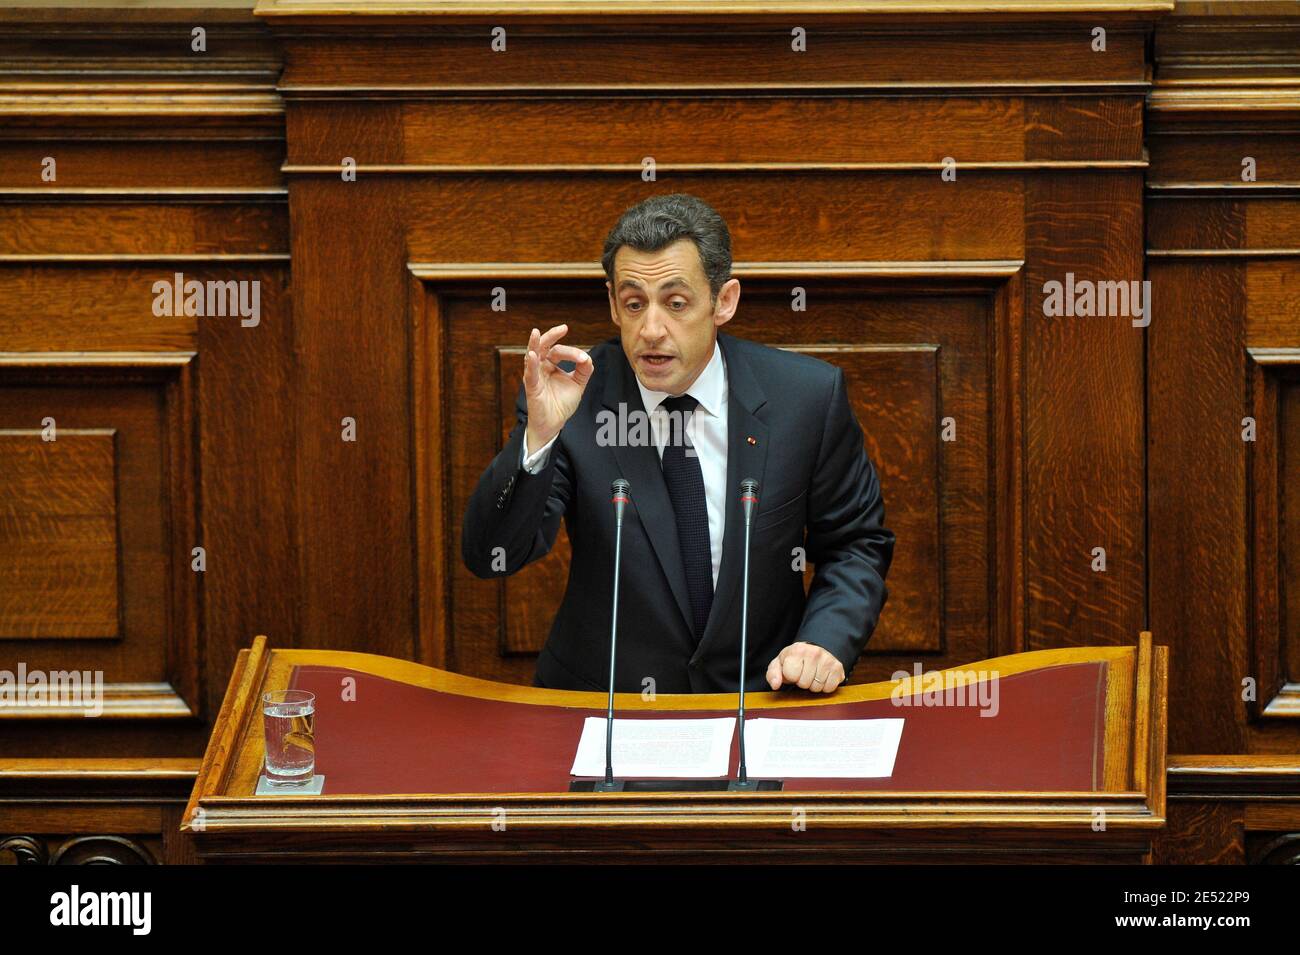 President Nicolas Sarkozy holds a speach to the parliament in Athens, Greece on June 6, 2008. Sarkozy arrived in Greece Friday for an official visit, the first by a French head of state in more than 25 years. Sarkozy was addressing the Greek parliament in a ceremony only accorded to three foreign presidents in the past: his predecessor Charles de Gaulle and US presidents Dwight Eisenhower and George Bush Sr. Photo by Mousse/ABACAPRESS.COM Stock Photo